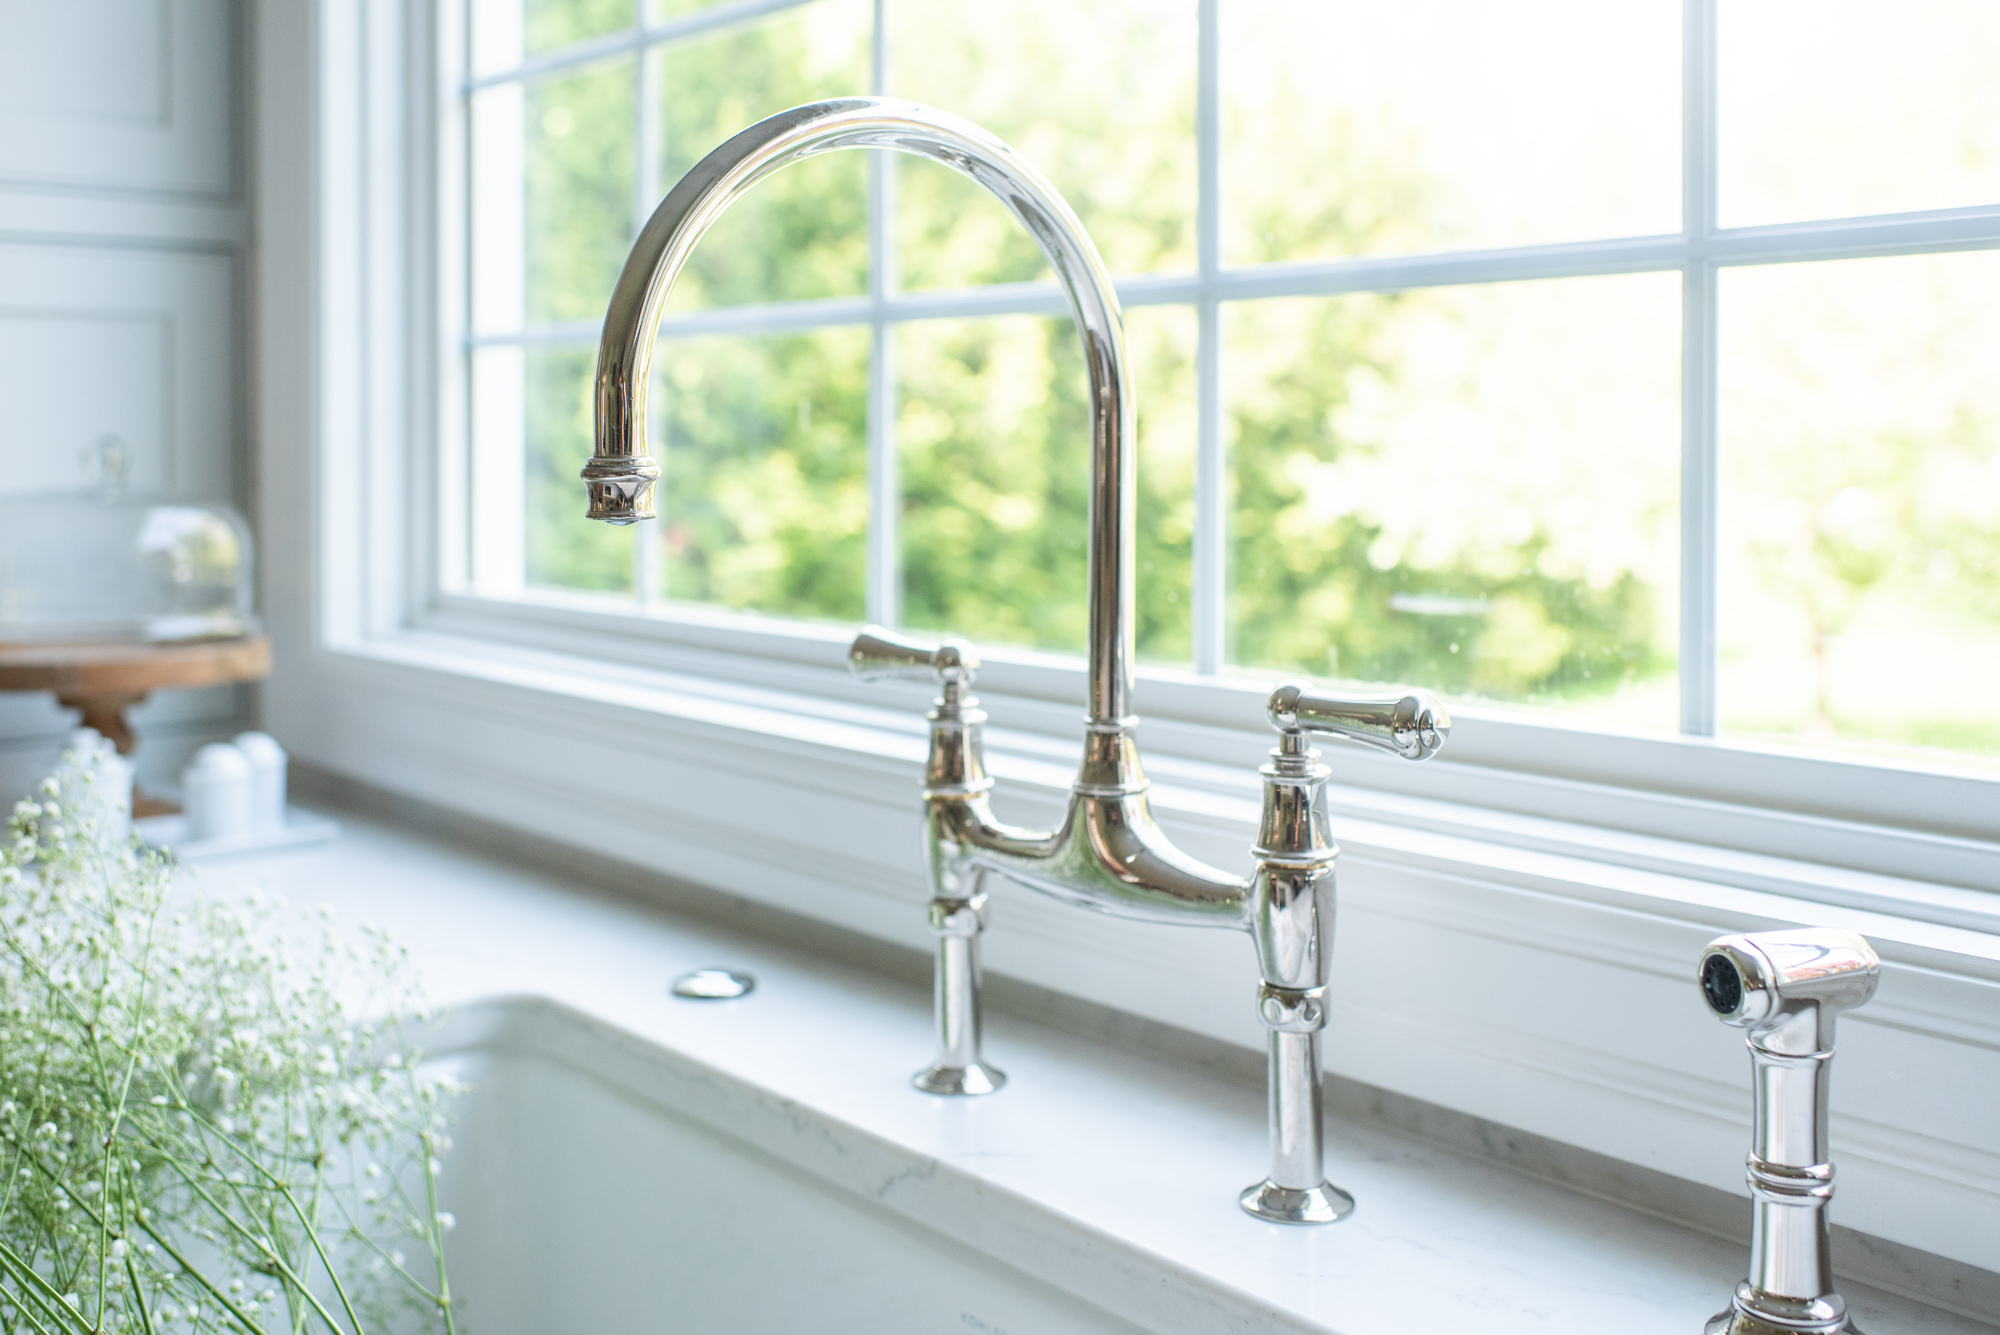 Perrin and Rowe faucet and Kohler sink